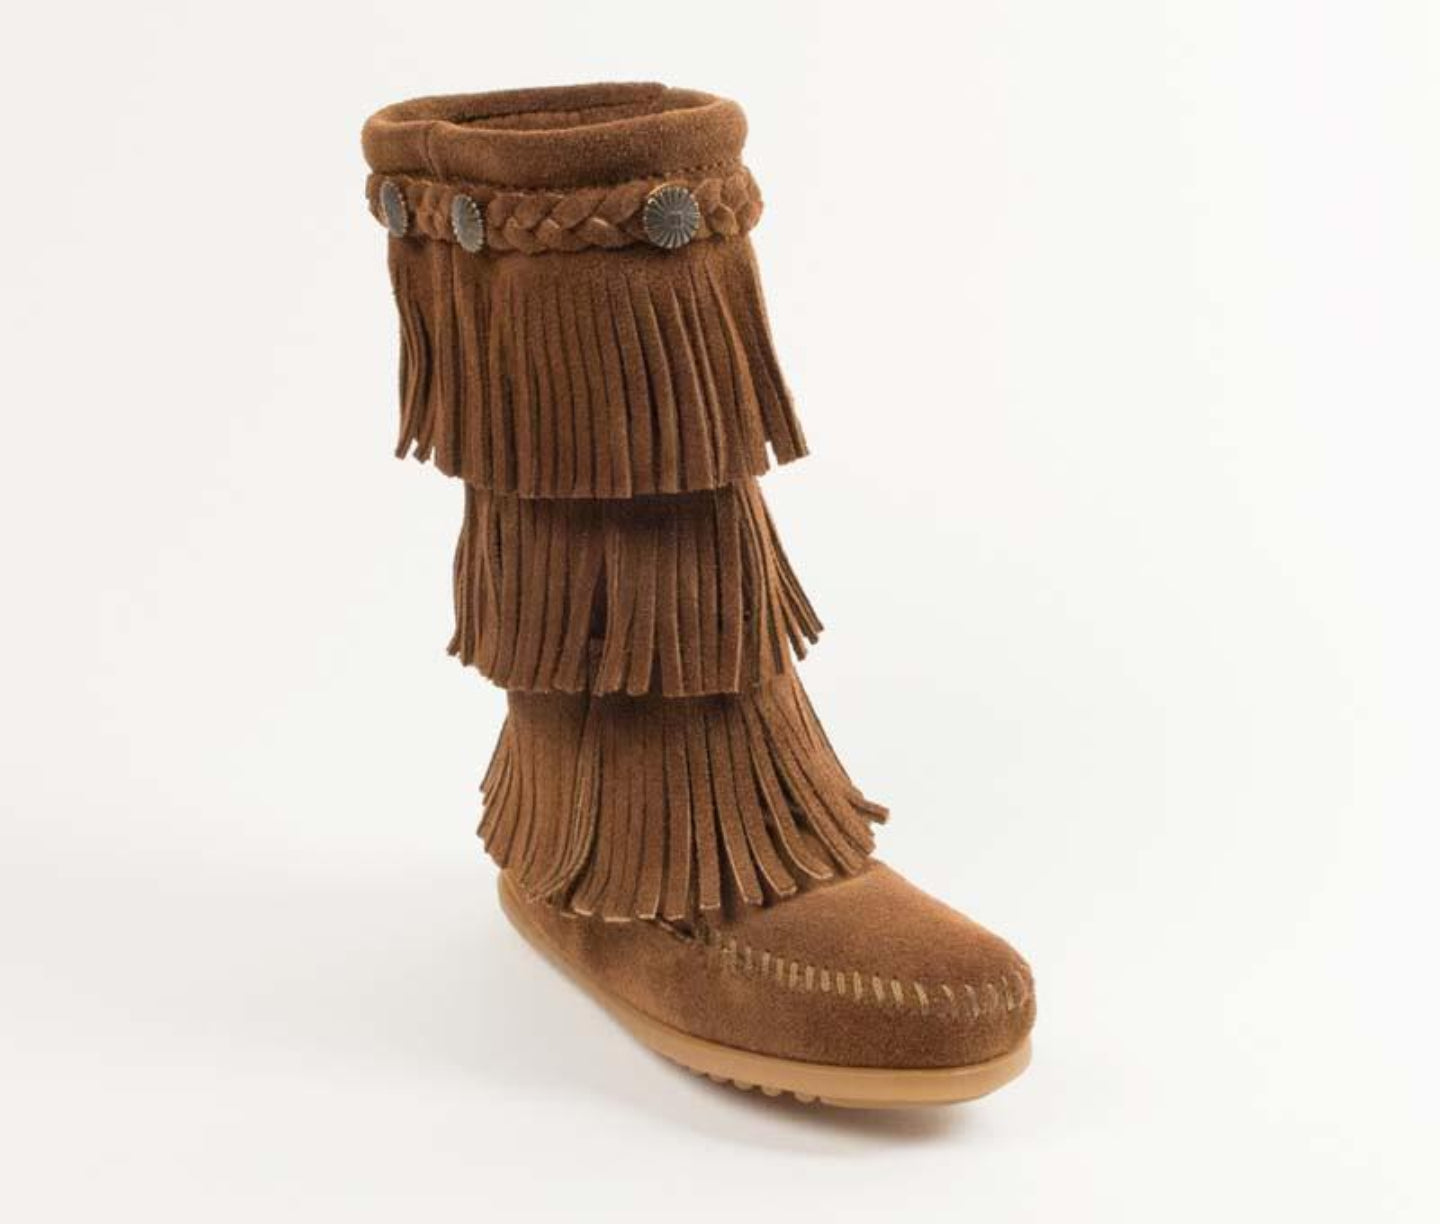 3-Layer Fringe Boot in Dusty Brown from 3/4 Angle View